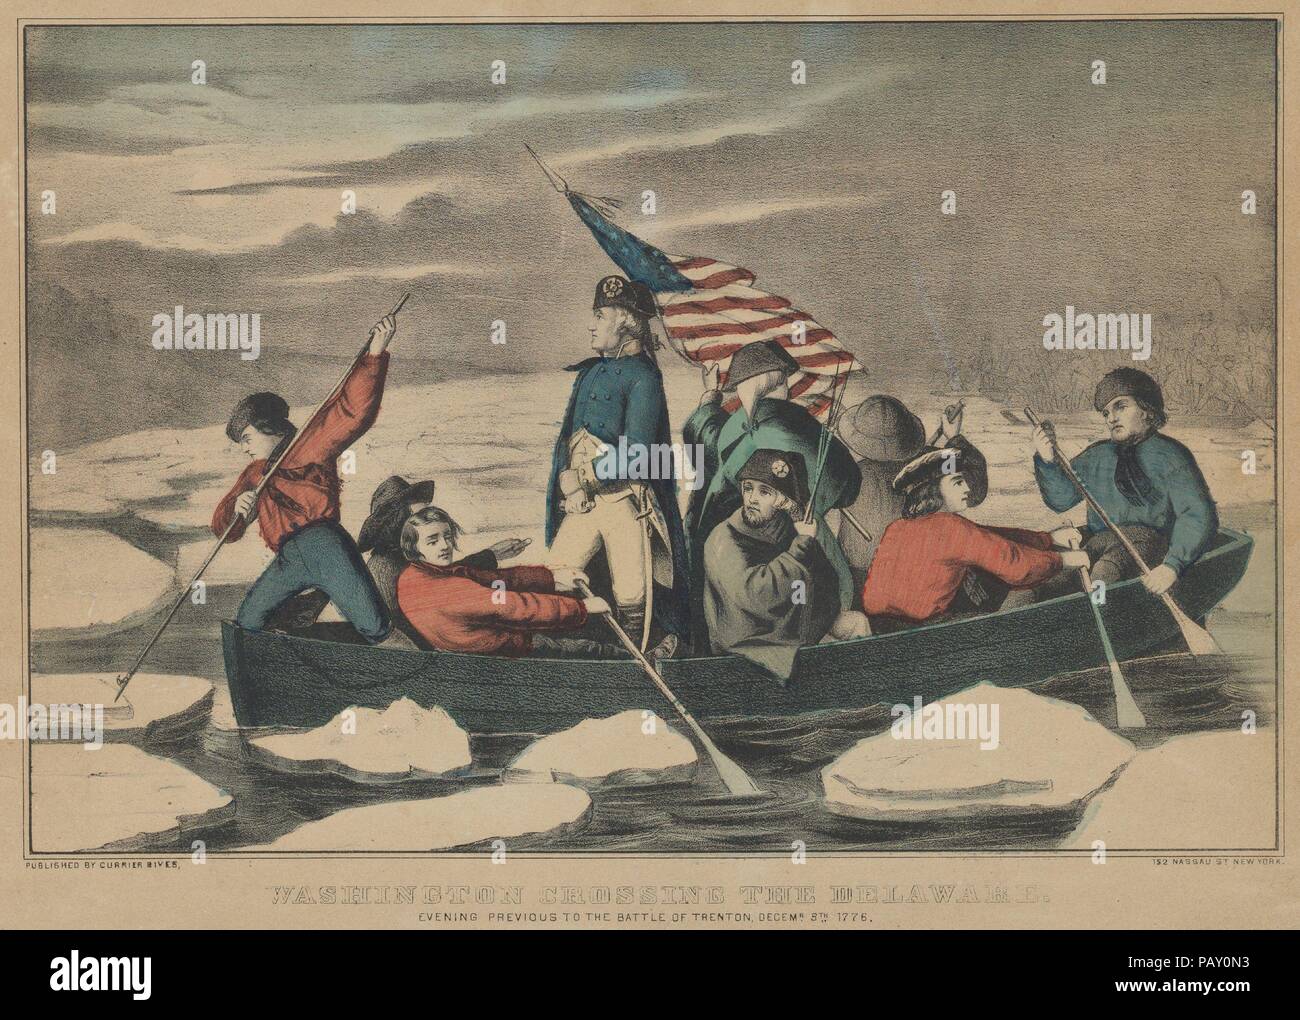 Washington Crossing the Delaware - Evening Previous to the Battle of Trenton, December 5th, 1776. Dimensions: Image: 8 3/16 × 12 1/2 in. (20.8 × 31.7 cm)  Sheet: 10 1/16 × 14 3/16 in. (25.5 × 36 cm). Publisher: Currier & Ives (American, active New York, 1857-1907). Sitter: George Washington (American, 1732-1799). Date: 1857-71.  Scene from the American Revolution. George Washington stands in boat crossing the icy river. Eight soldiers accompany Washington in the boat, some rowing, one pushing ice out of the way, one holding the American flag aloft. Museum: Metropolitan Museum of Art, New York, Stock Photo